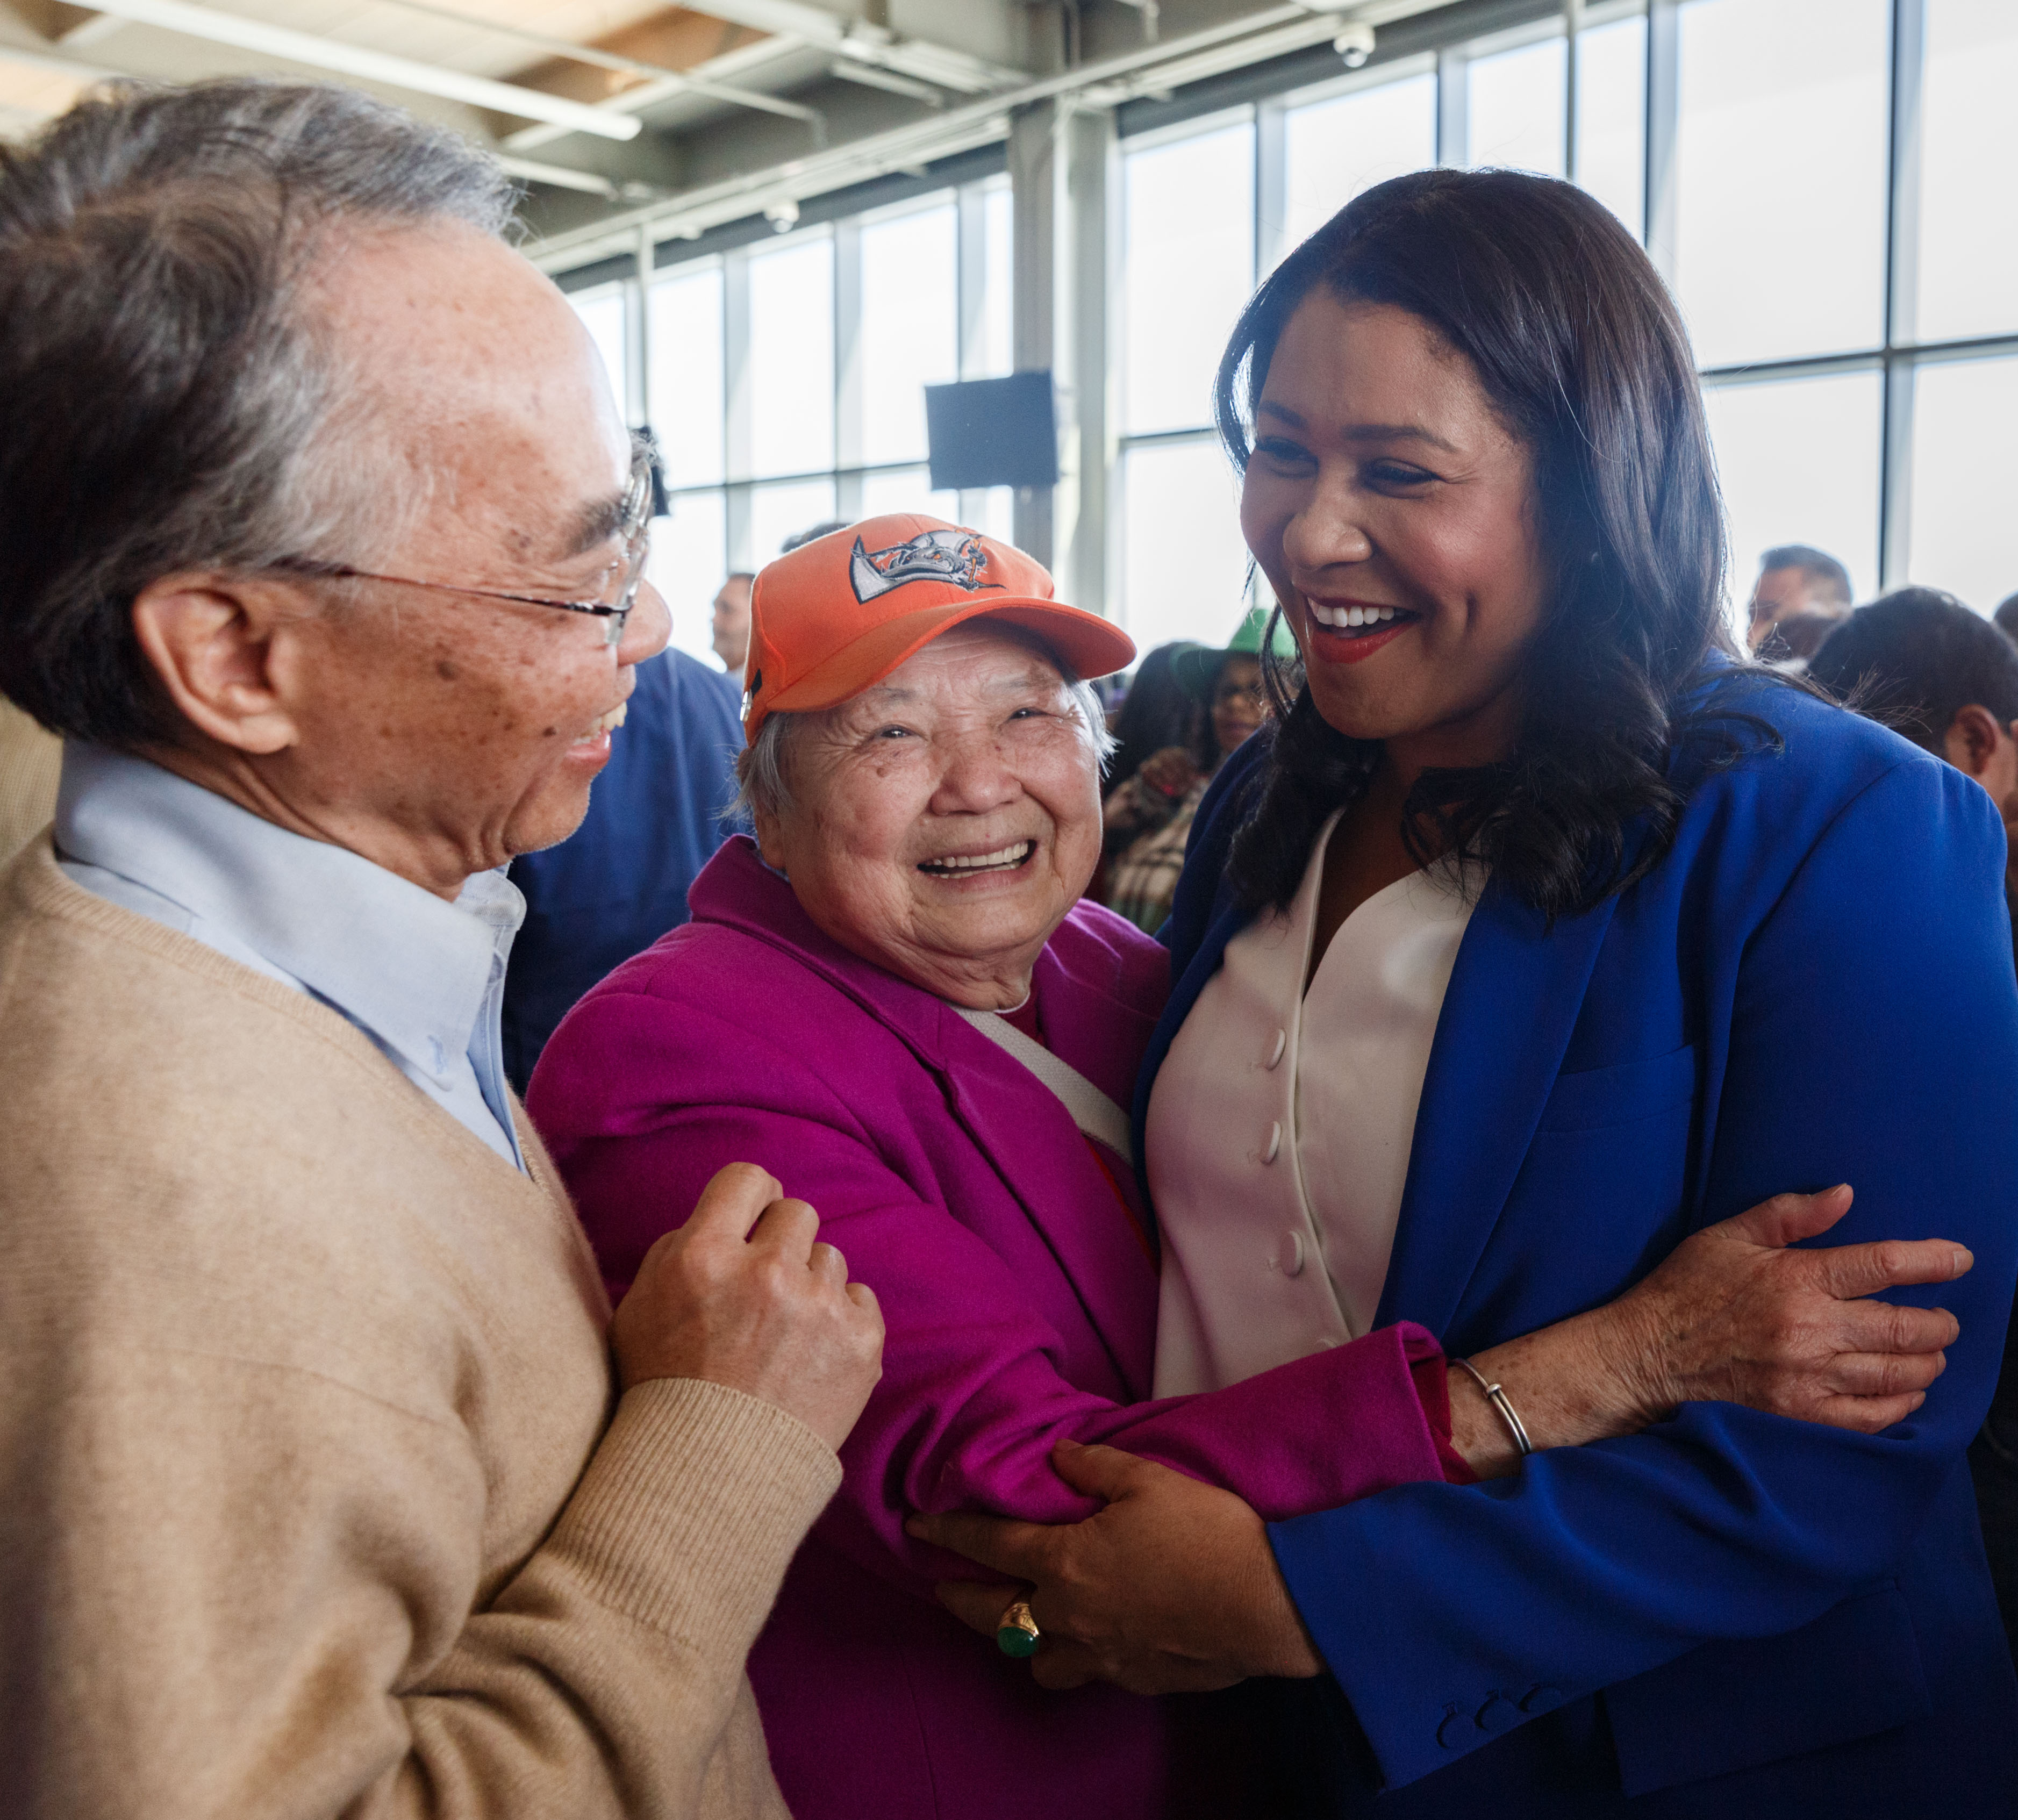 An elderly Asian couple shares a joyful moment with a smiling woman in a blue blazer, inside a bright room with large windows.